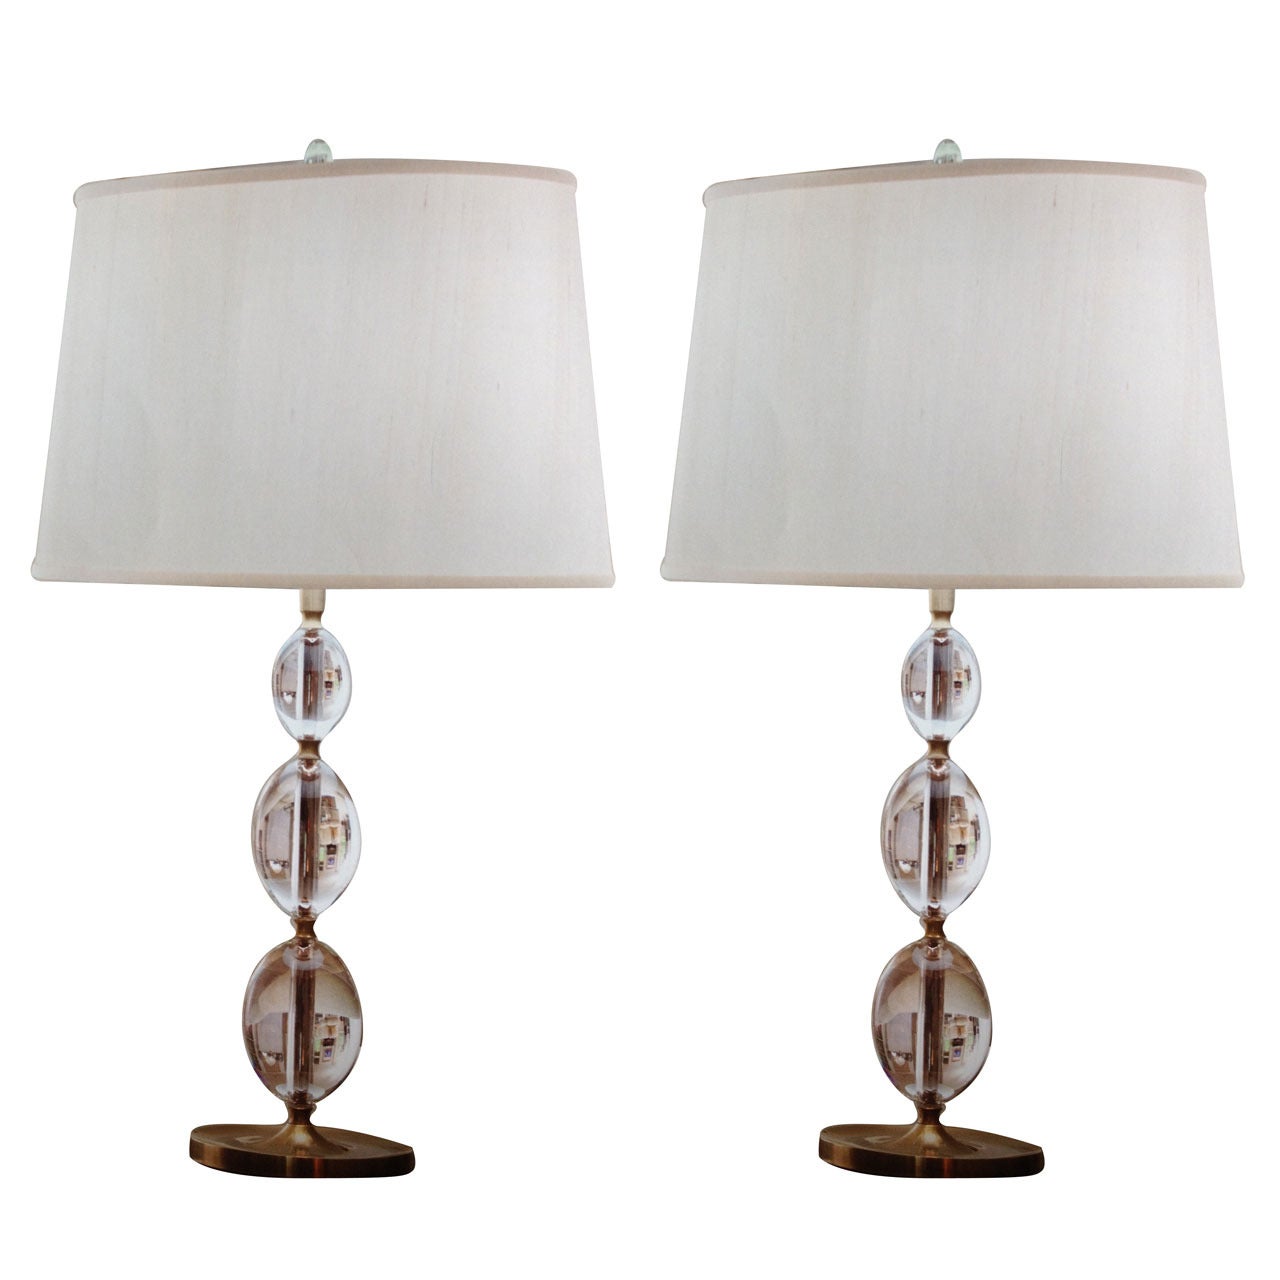 Two elegant pairs of Italian glass table lamps with three solid crystal spheres stacked on solid brass bases in a sober, modern presentation.

Priced and sold by the pair. 

 